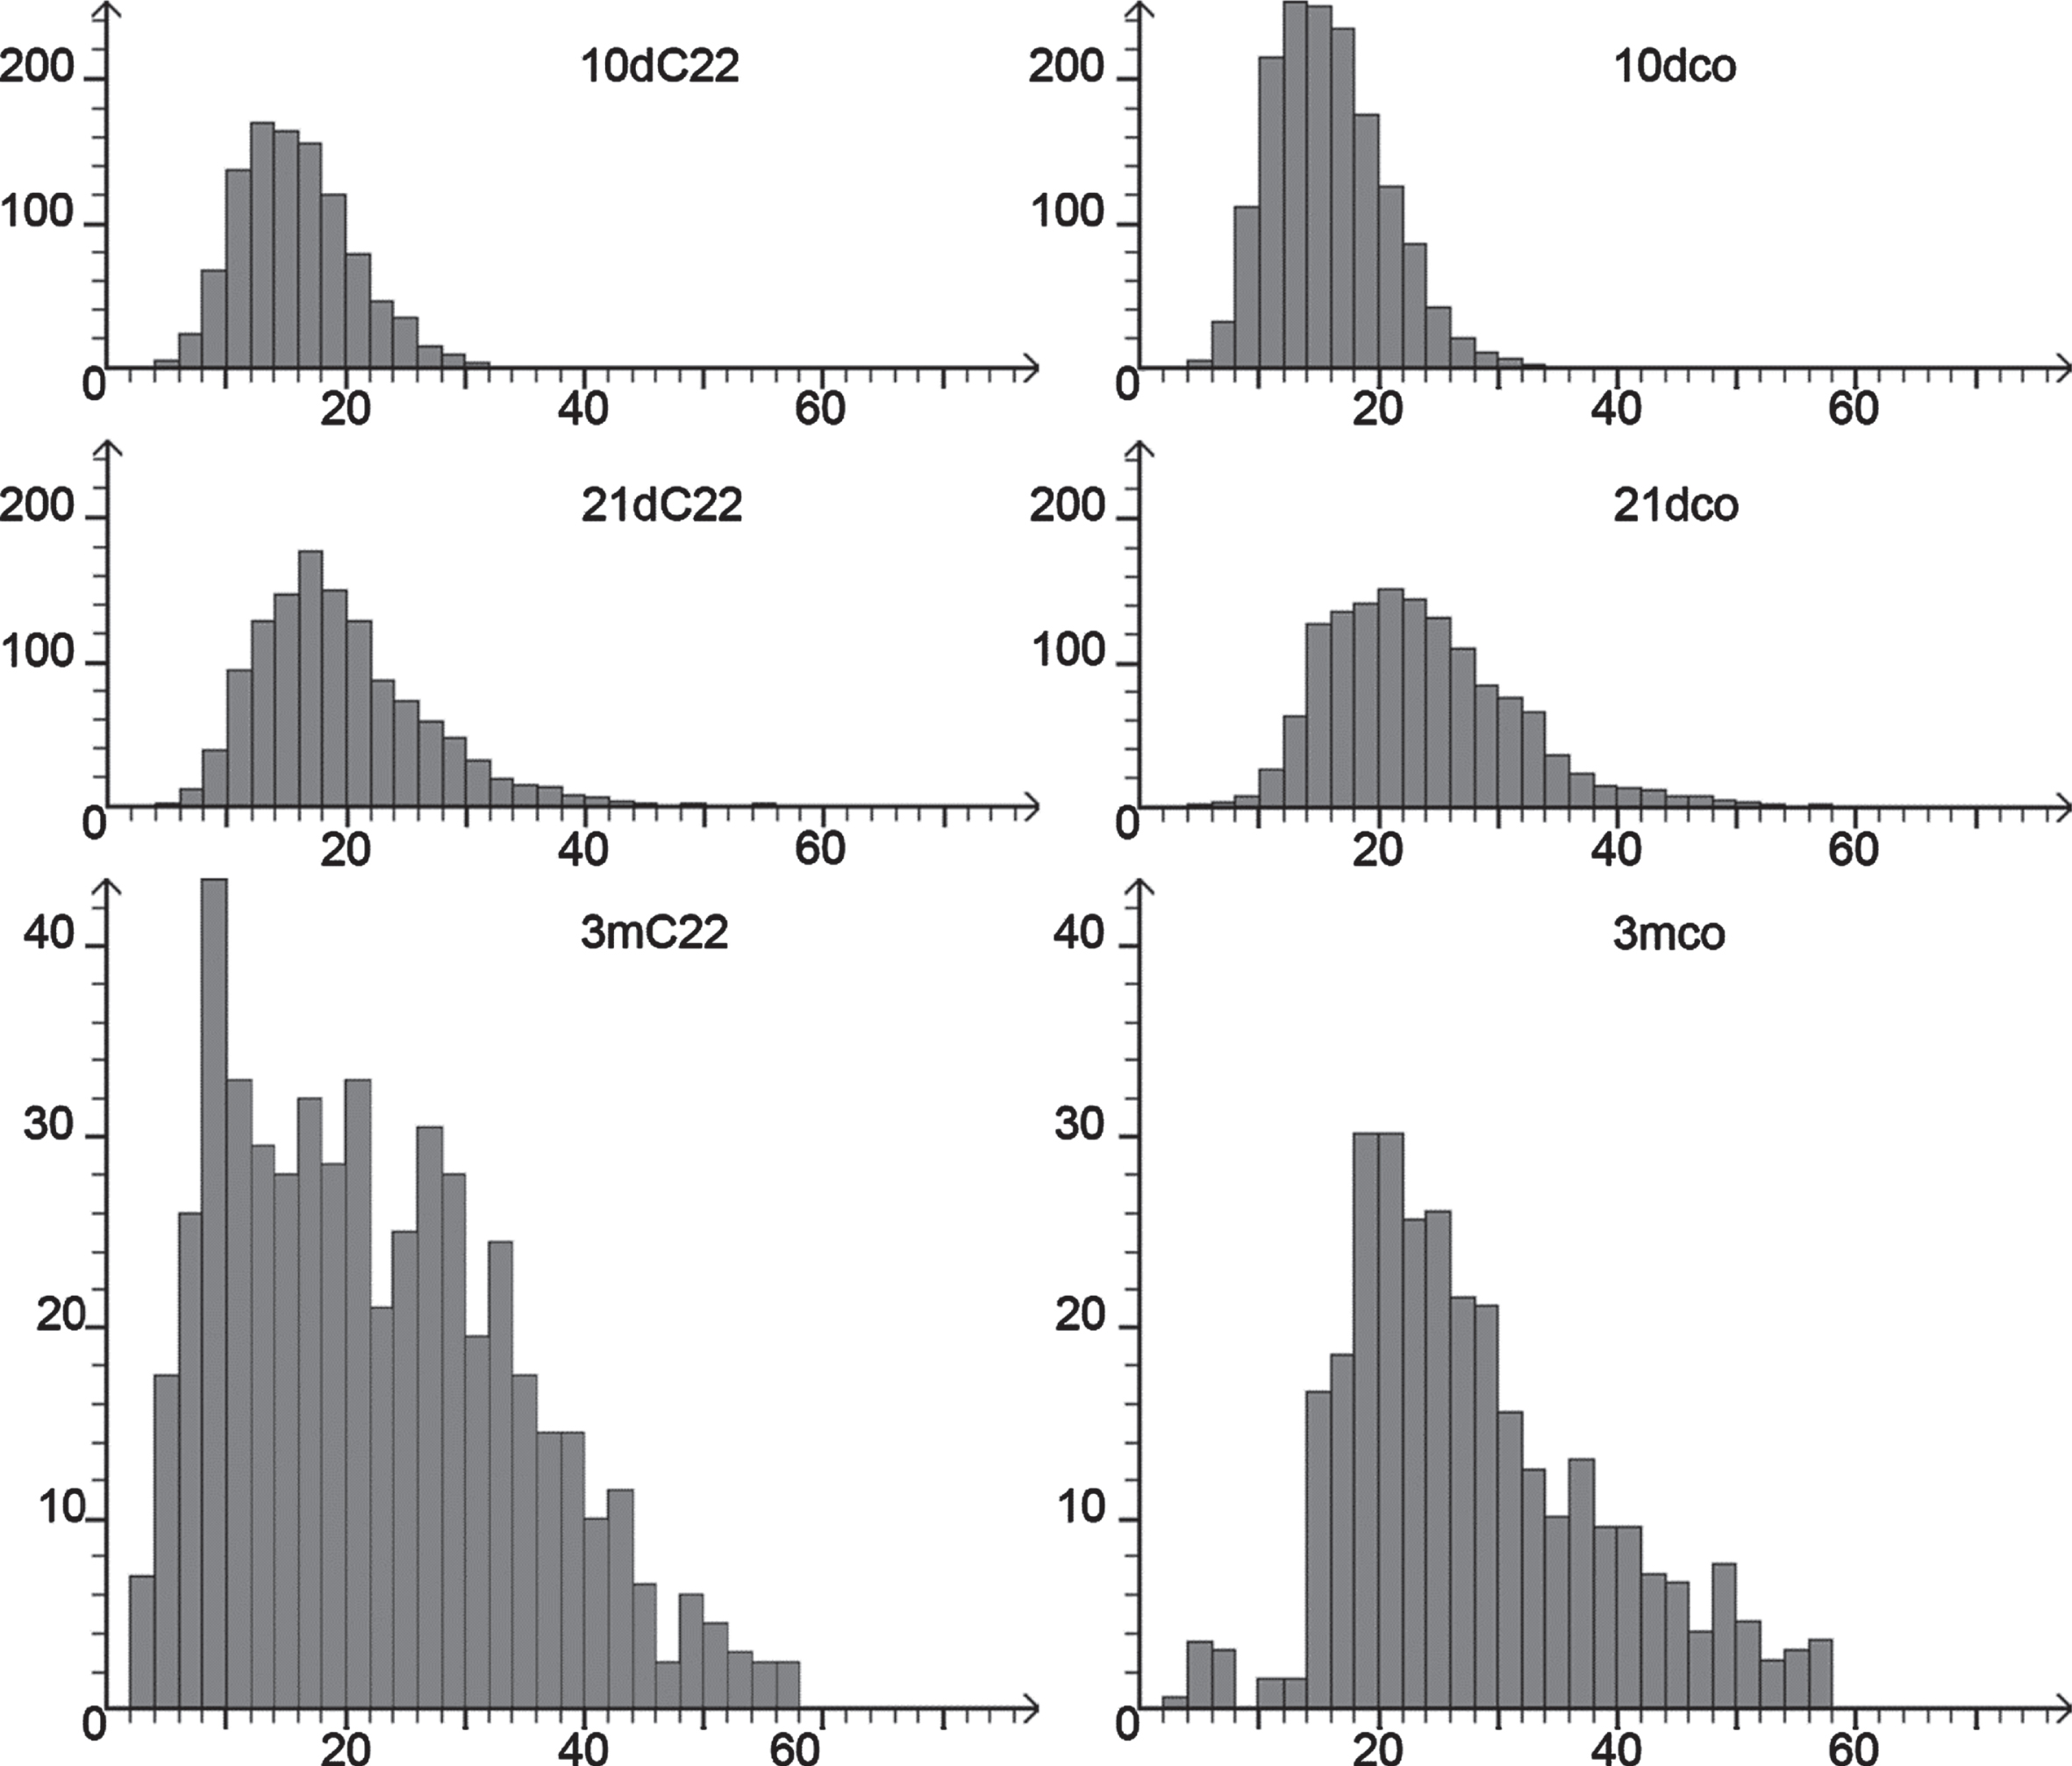 Fibre diameter histograms. Fibre diameter histograms of (from top to bottom) 10 days, 21 days and 3 months. C22 on the left, controls on the right. Note difference in Y-axis scale for the 3 months groups that include fewer fibres.